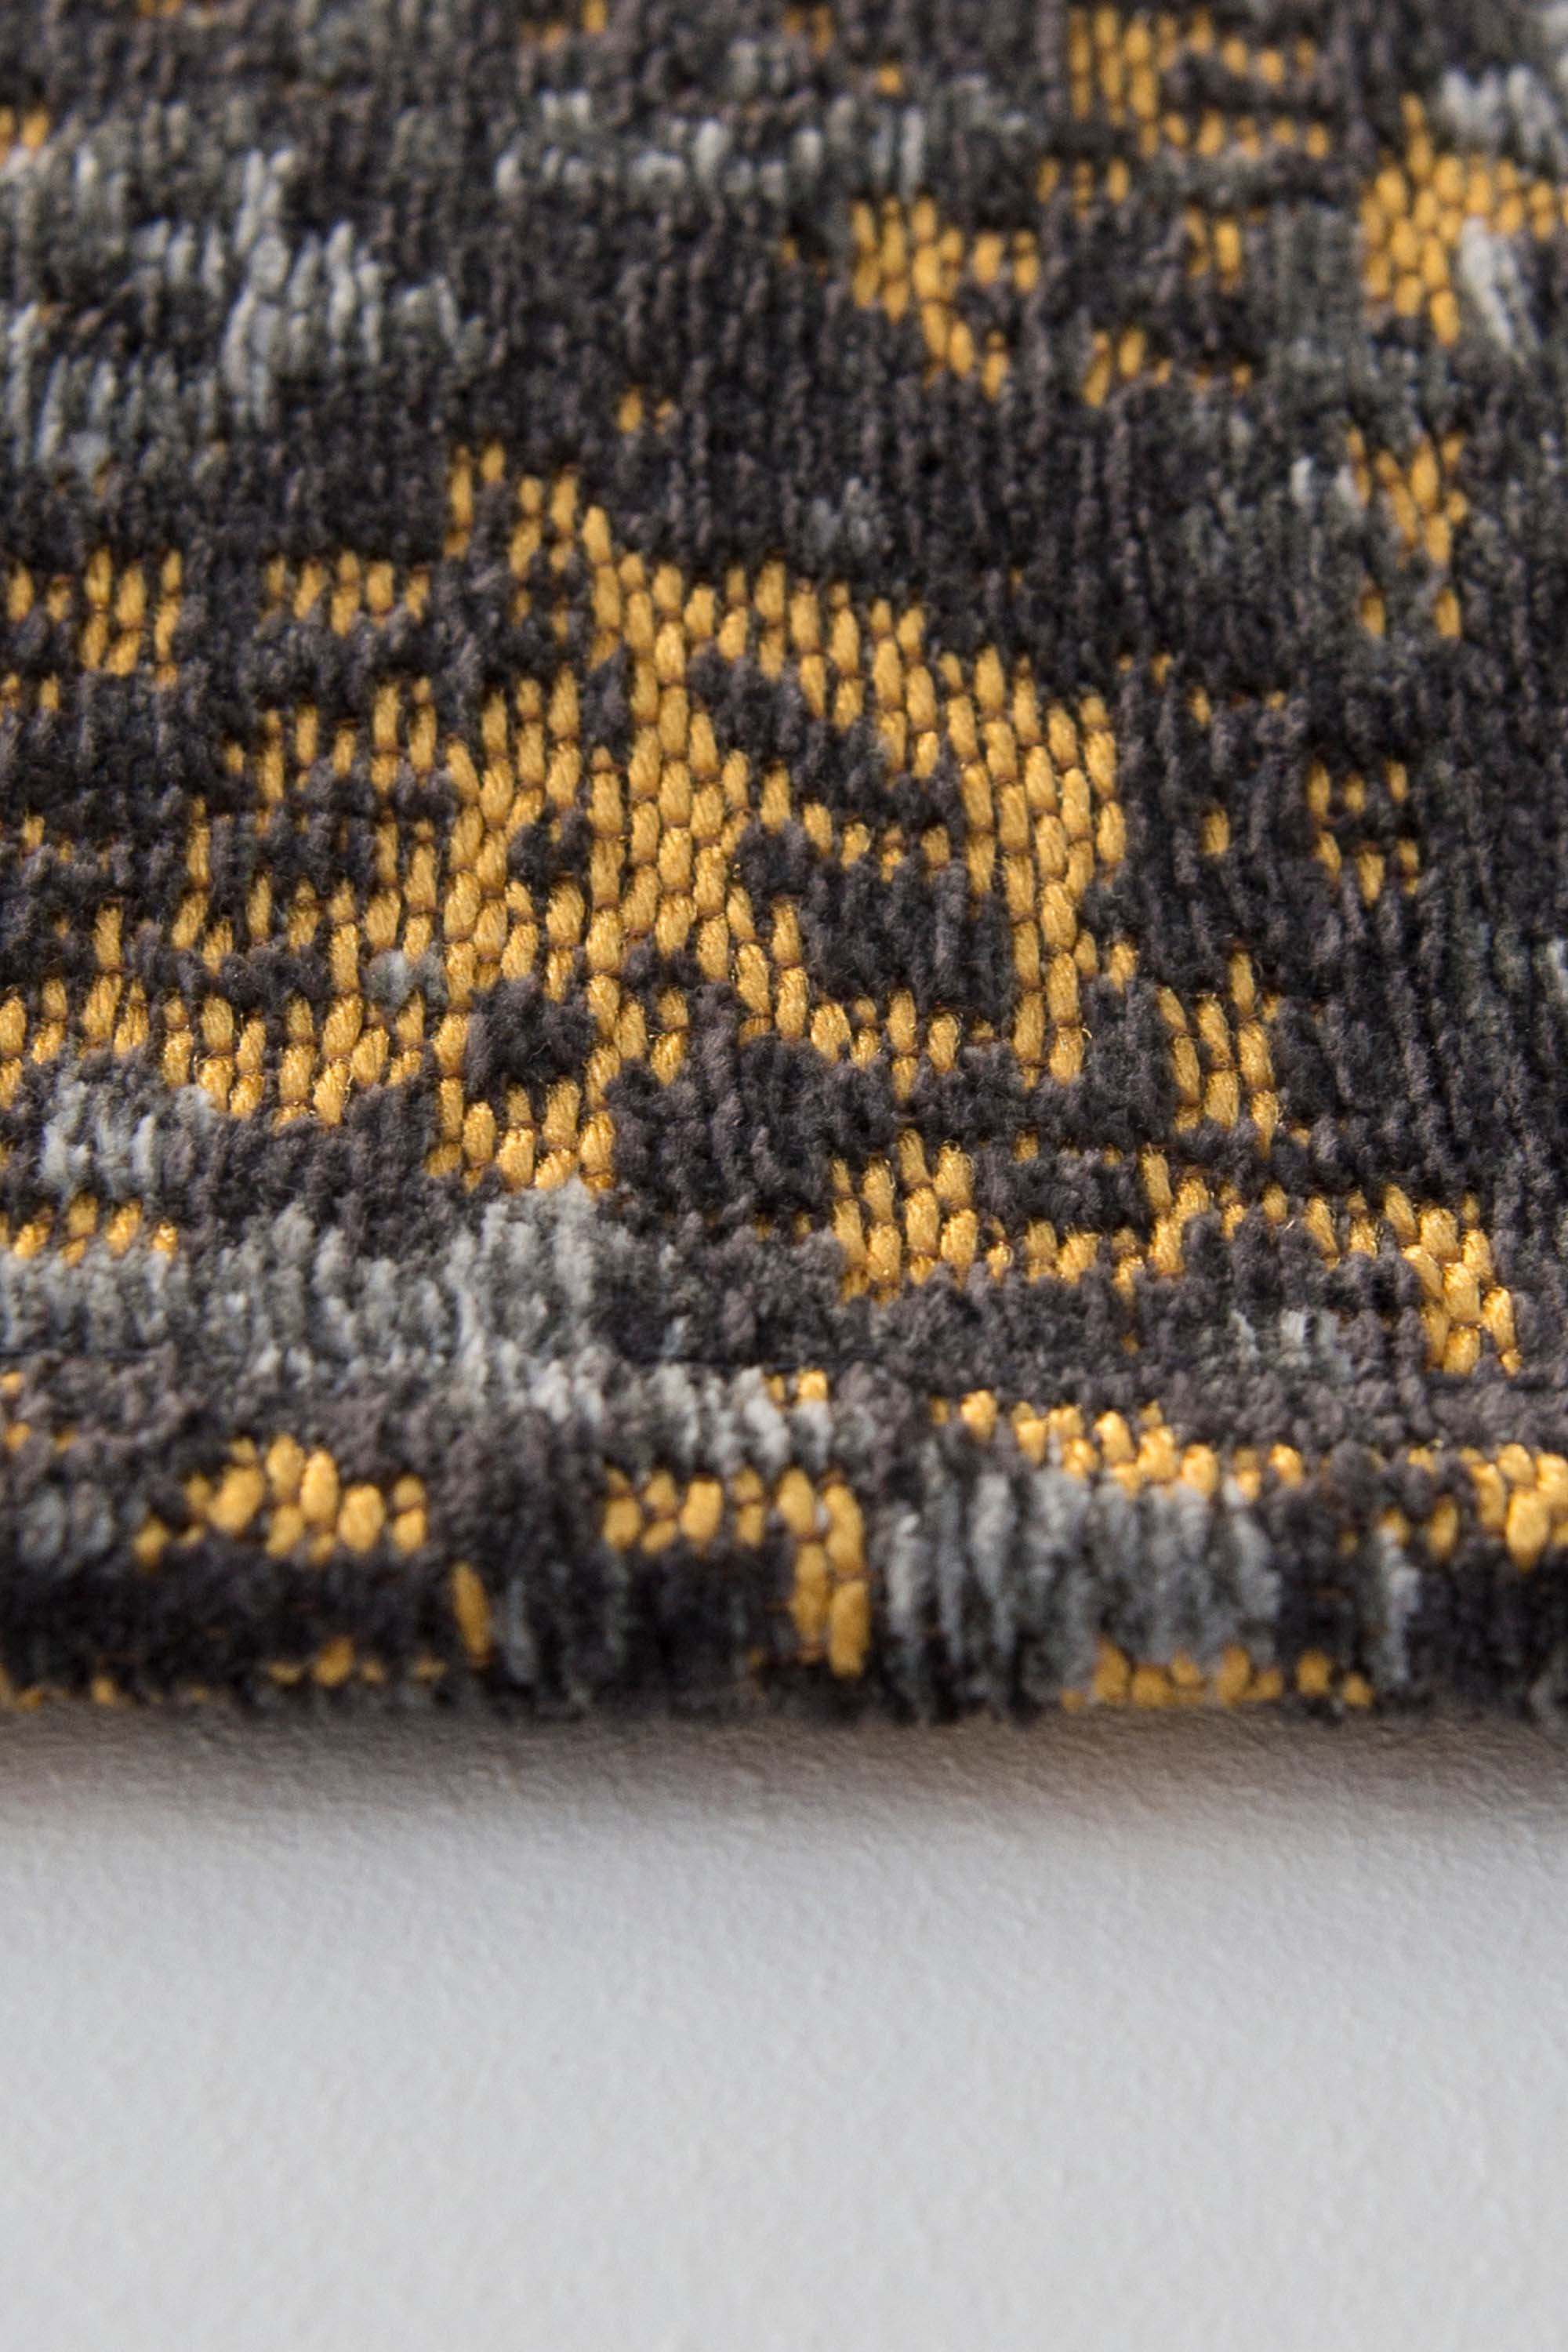 Grey and gold abstract runner rug